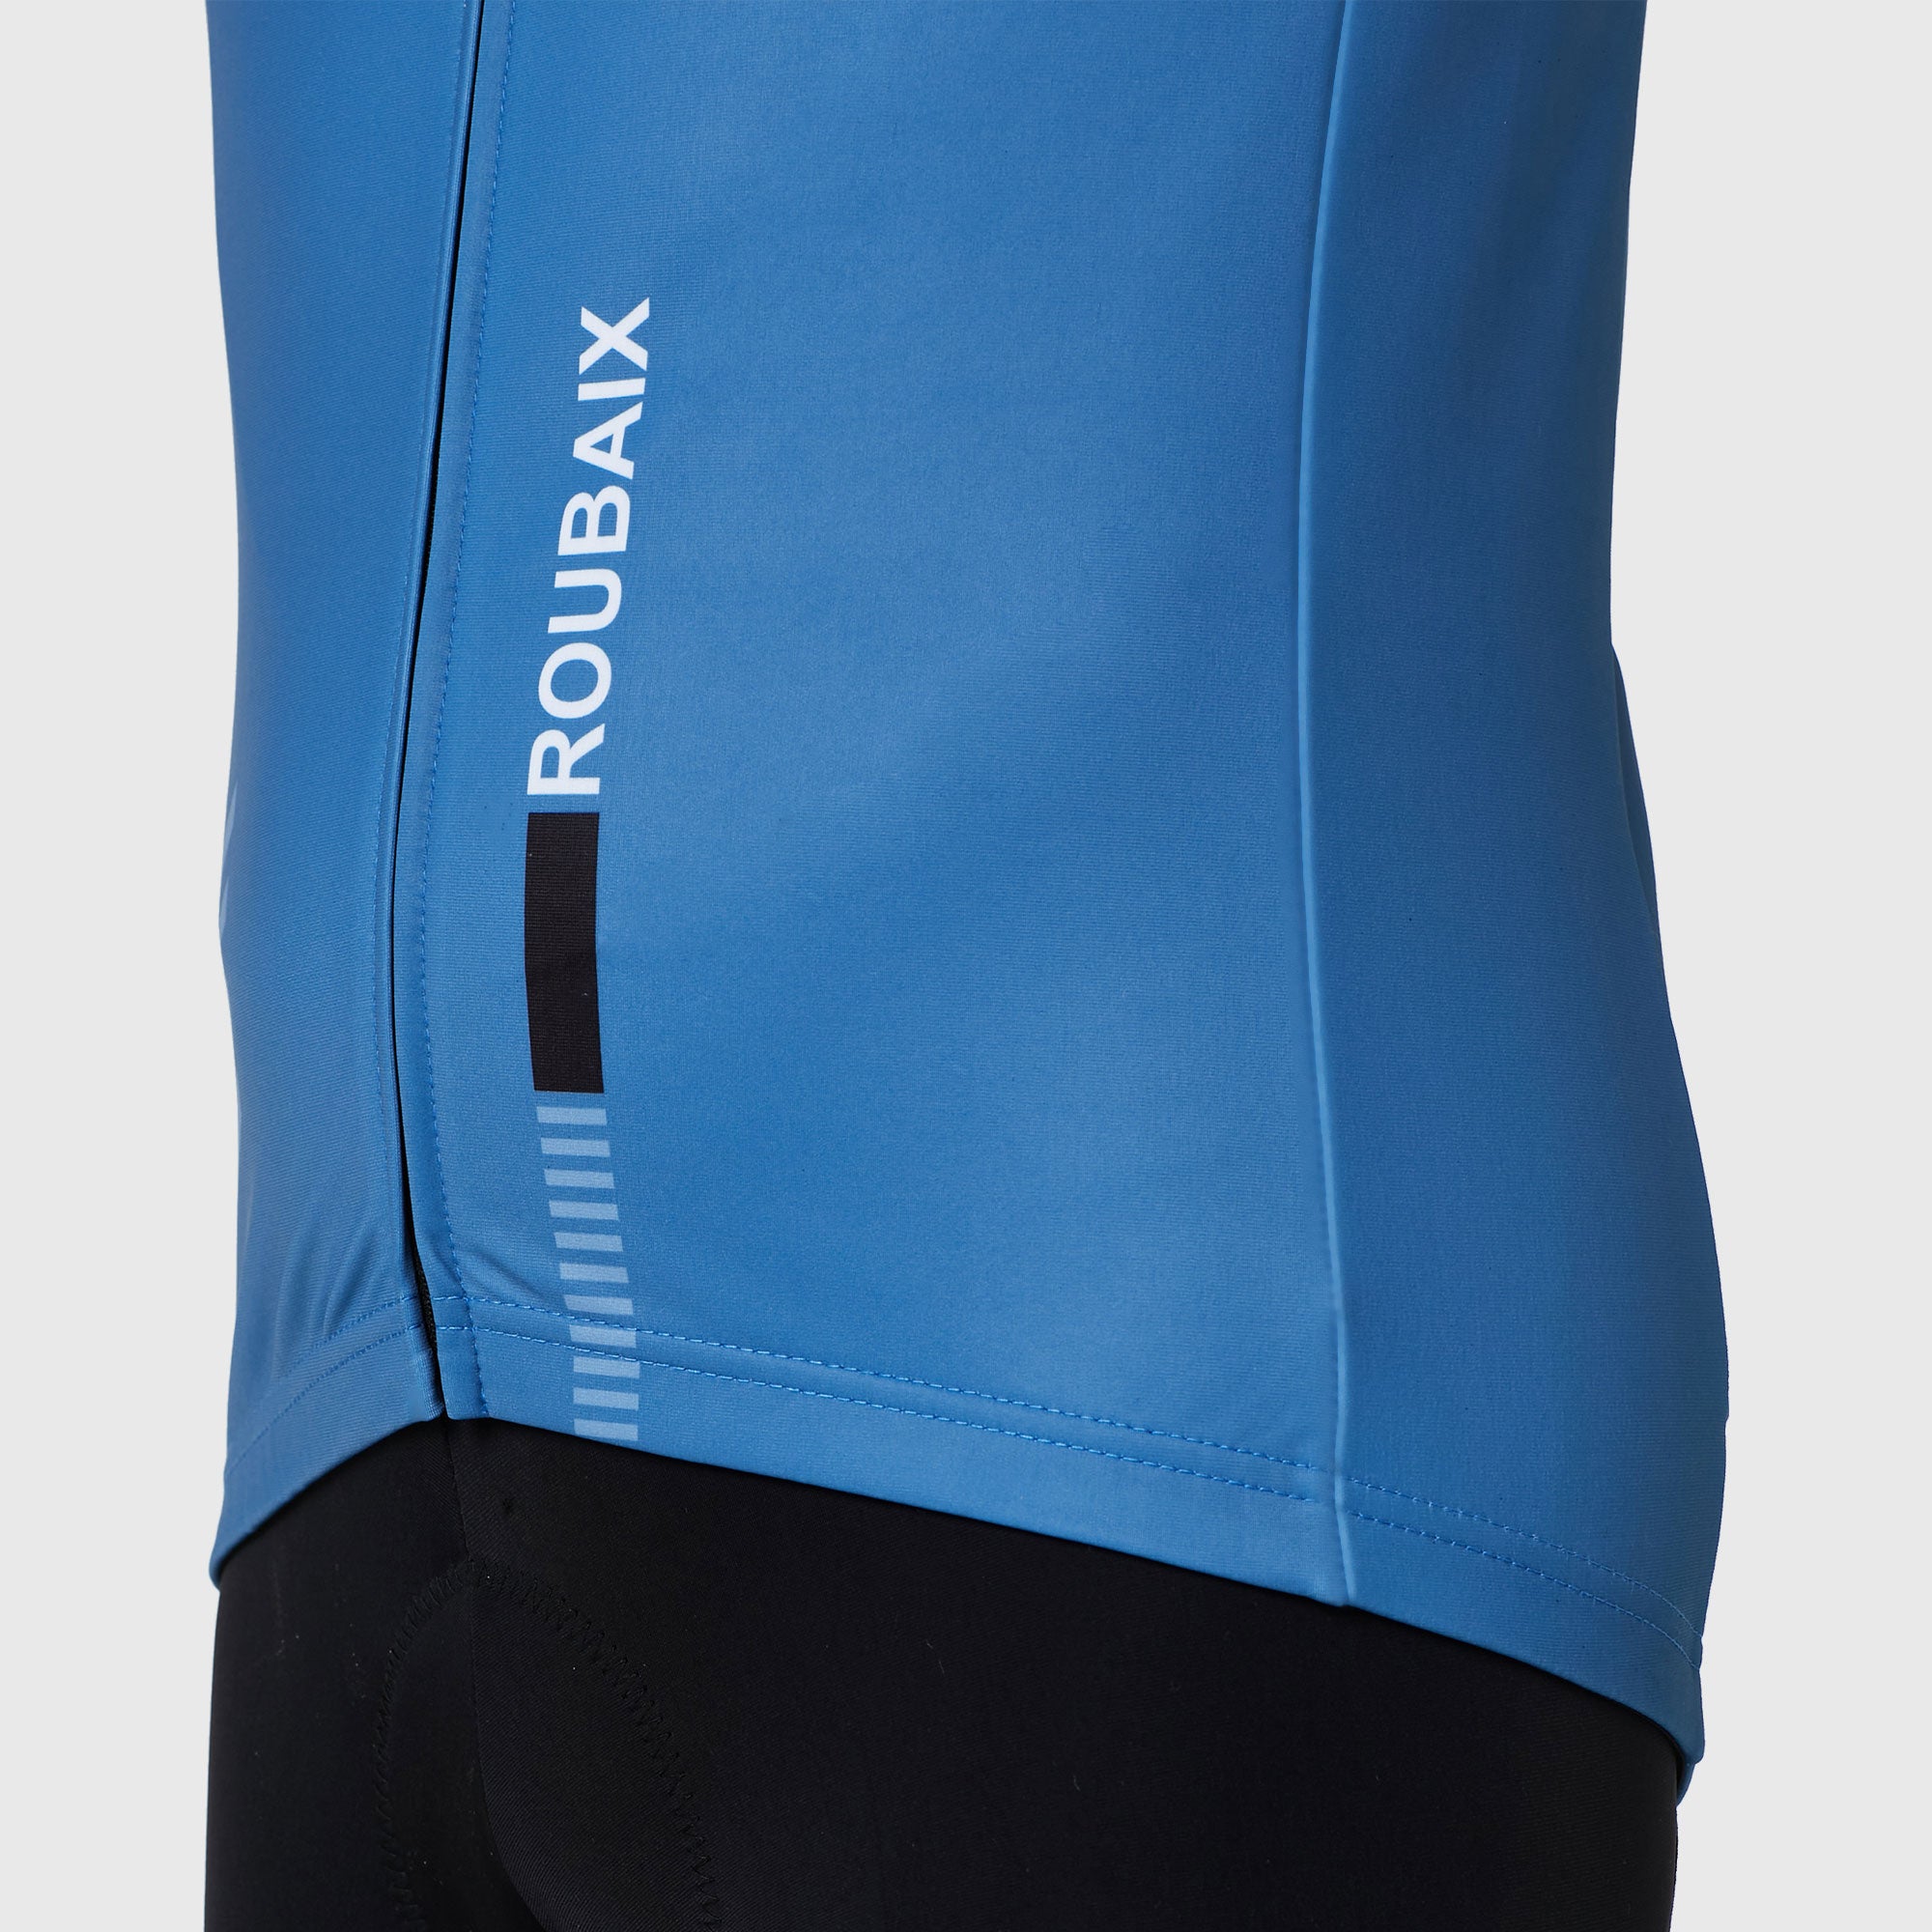 Fdx Limited Edition Blue Men's Long Sleeve Thermal Cycling Jersey | FDX  Sports® - FDX Sports US